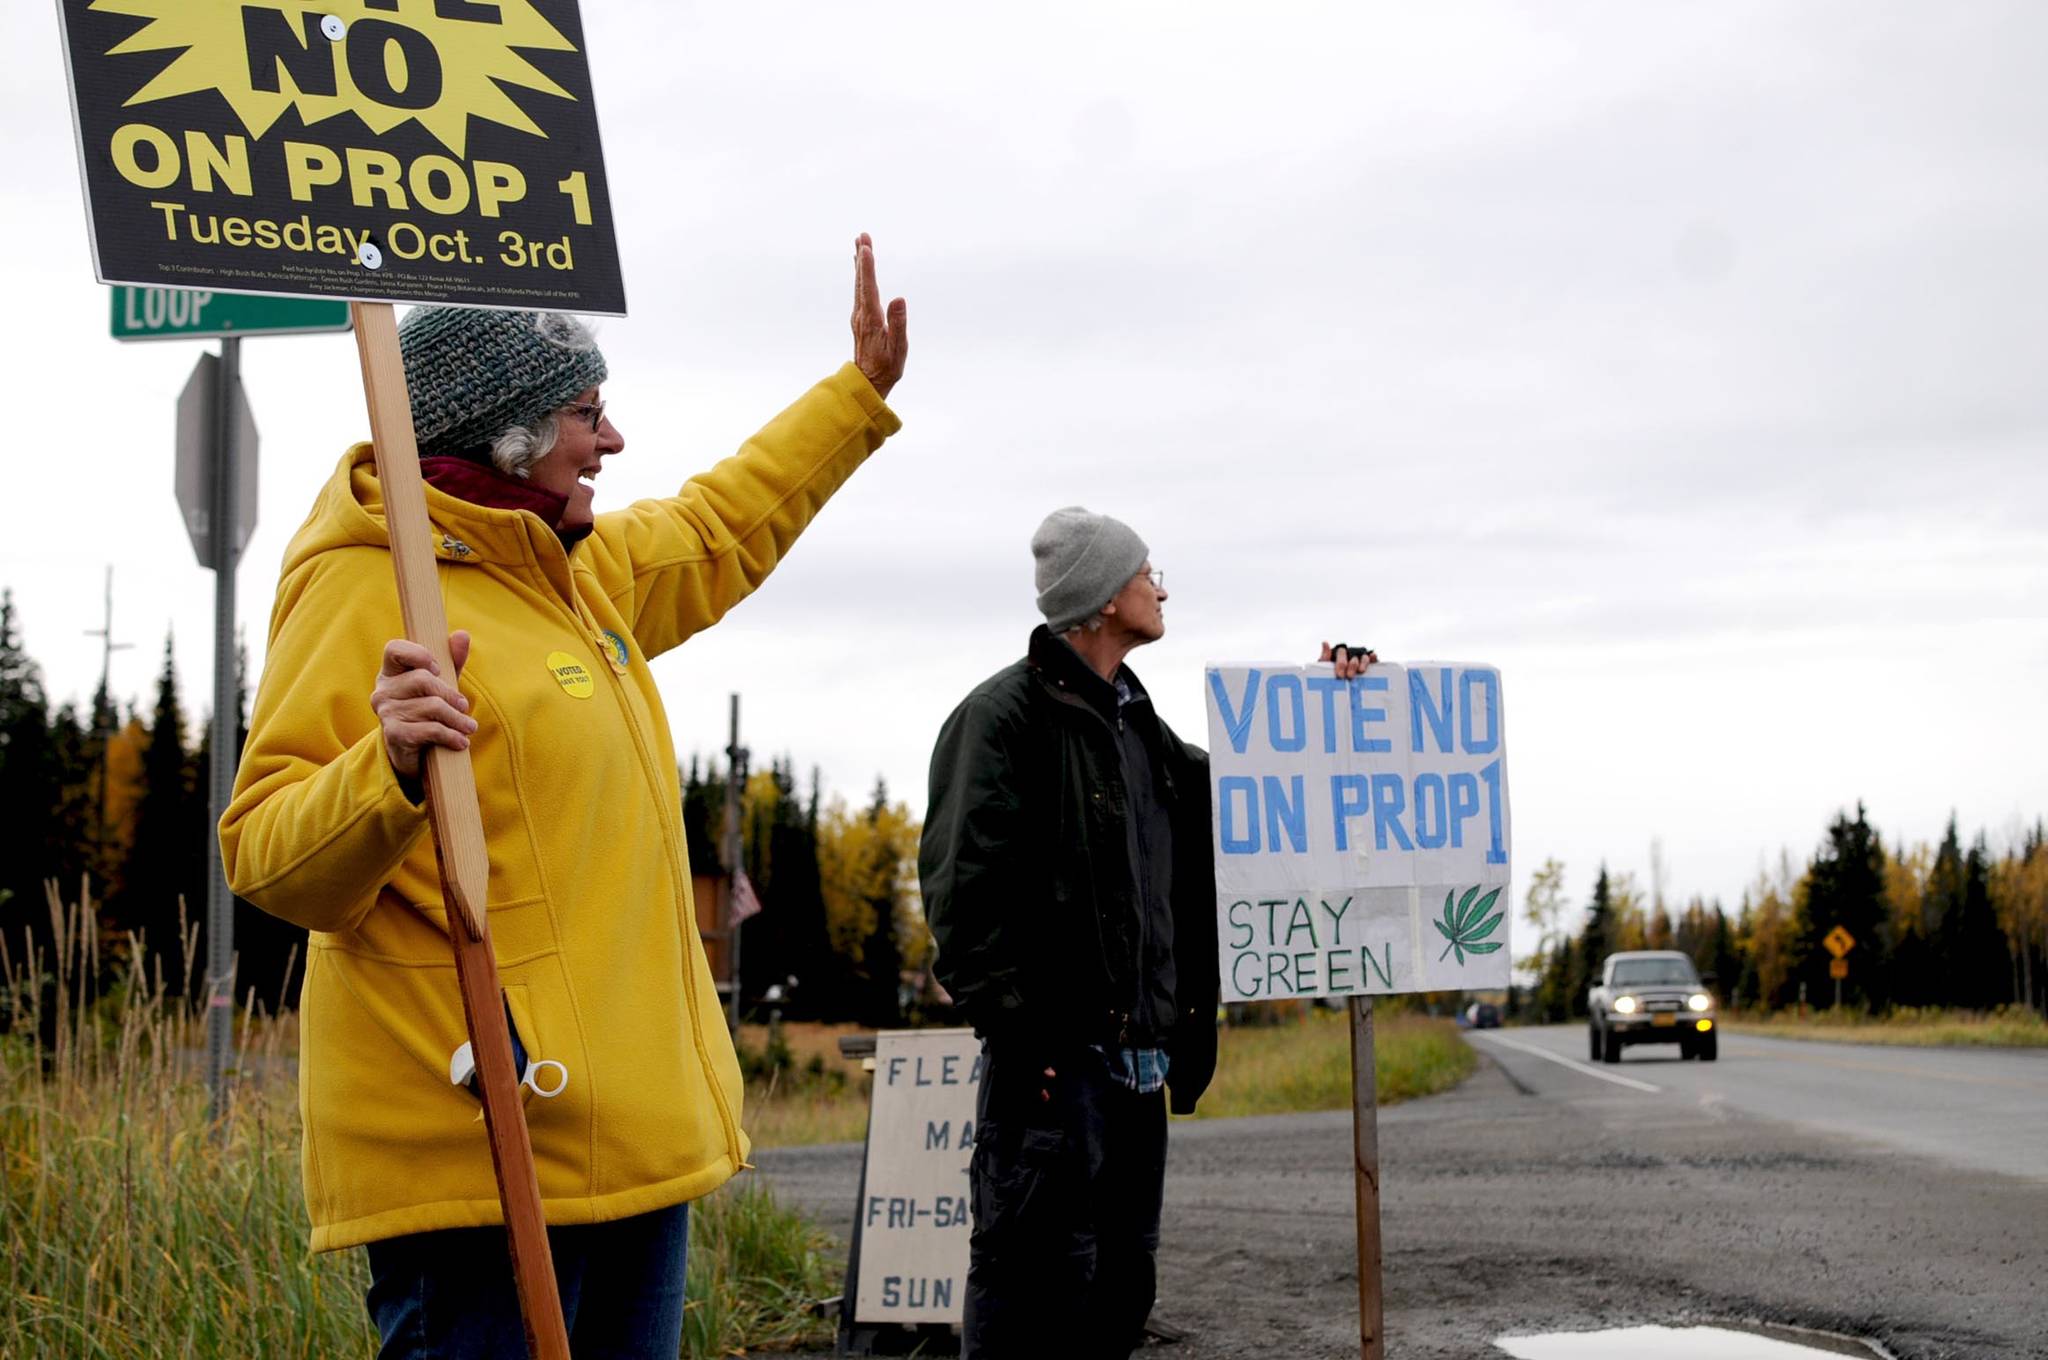 Ann Fraser (left) and Steve Waldron (right), both of Kasilof) wave signs opposing Kenai Peninsula Borough Proposition 1 on the corner of Pollard Loop and the Sterling Highway on Tuesday in Kasilof. Voters in Kasilof and the other unincorporated communities of the borough voted Tuesday on Proposition 1, which asked whether commercial cannabis operations should be legal in the borough outside the city limits. (Photo by Elizabeth Earl/Peninsula Clarion)